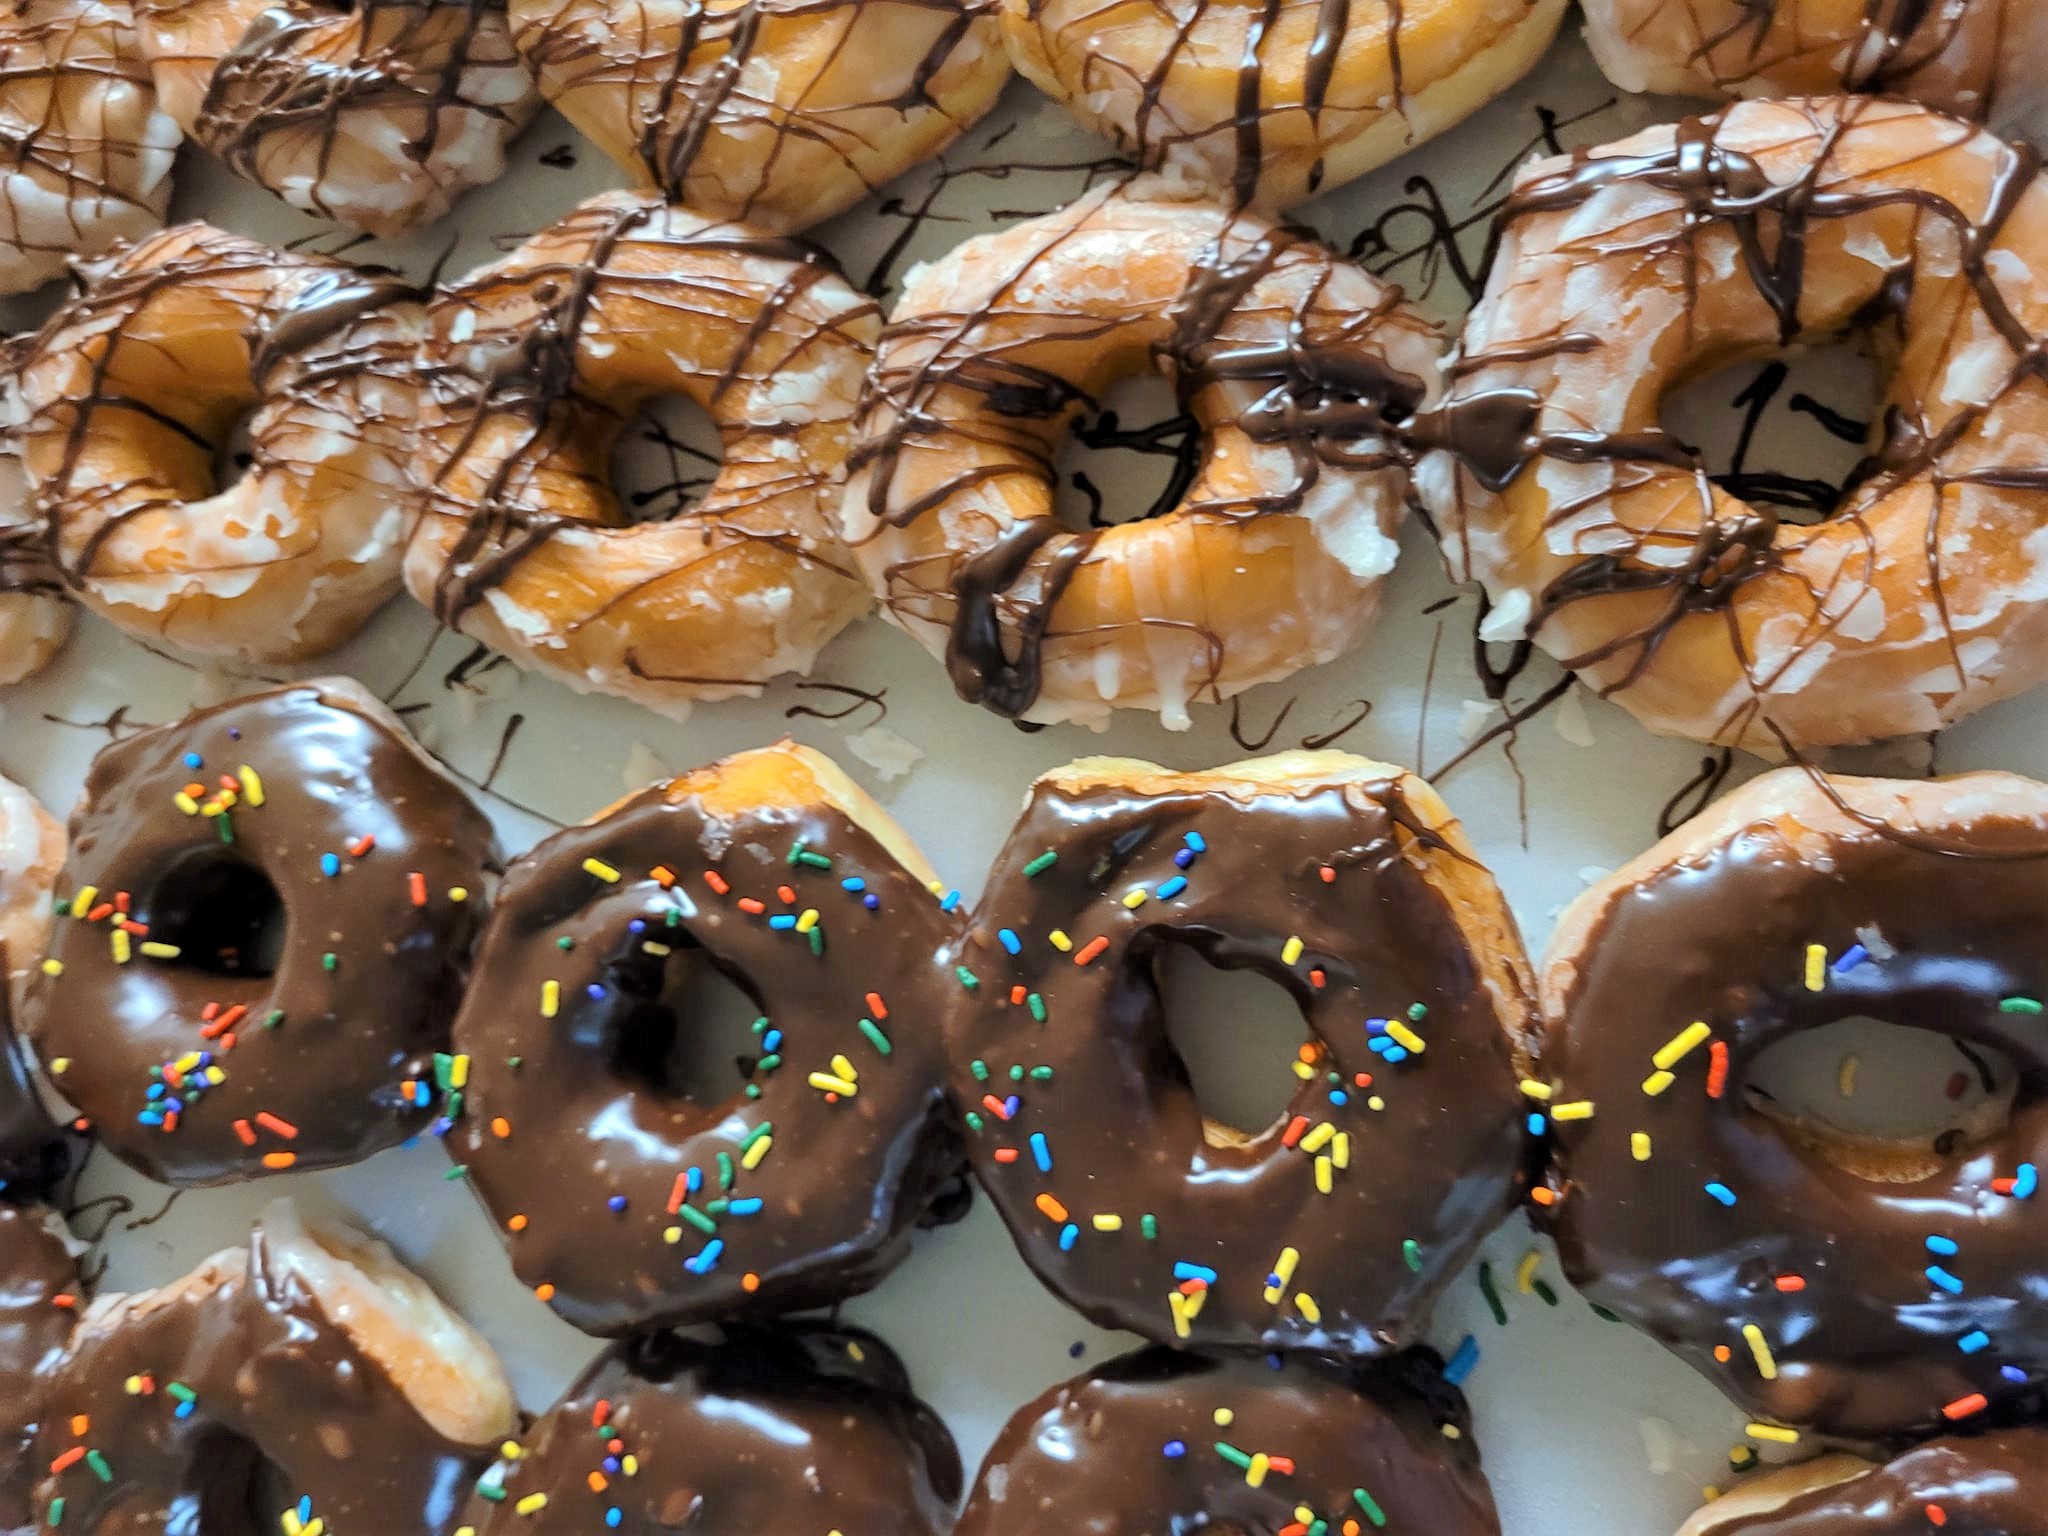 Honey Creme doughnuts are now available in downtown Louisville